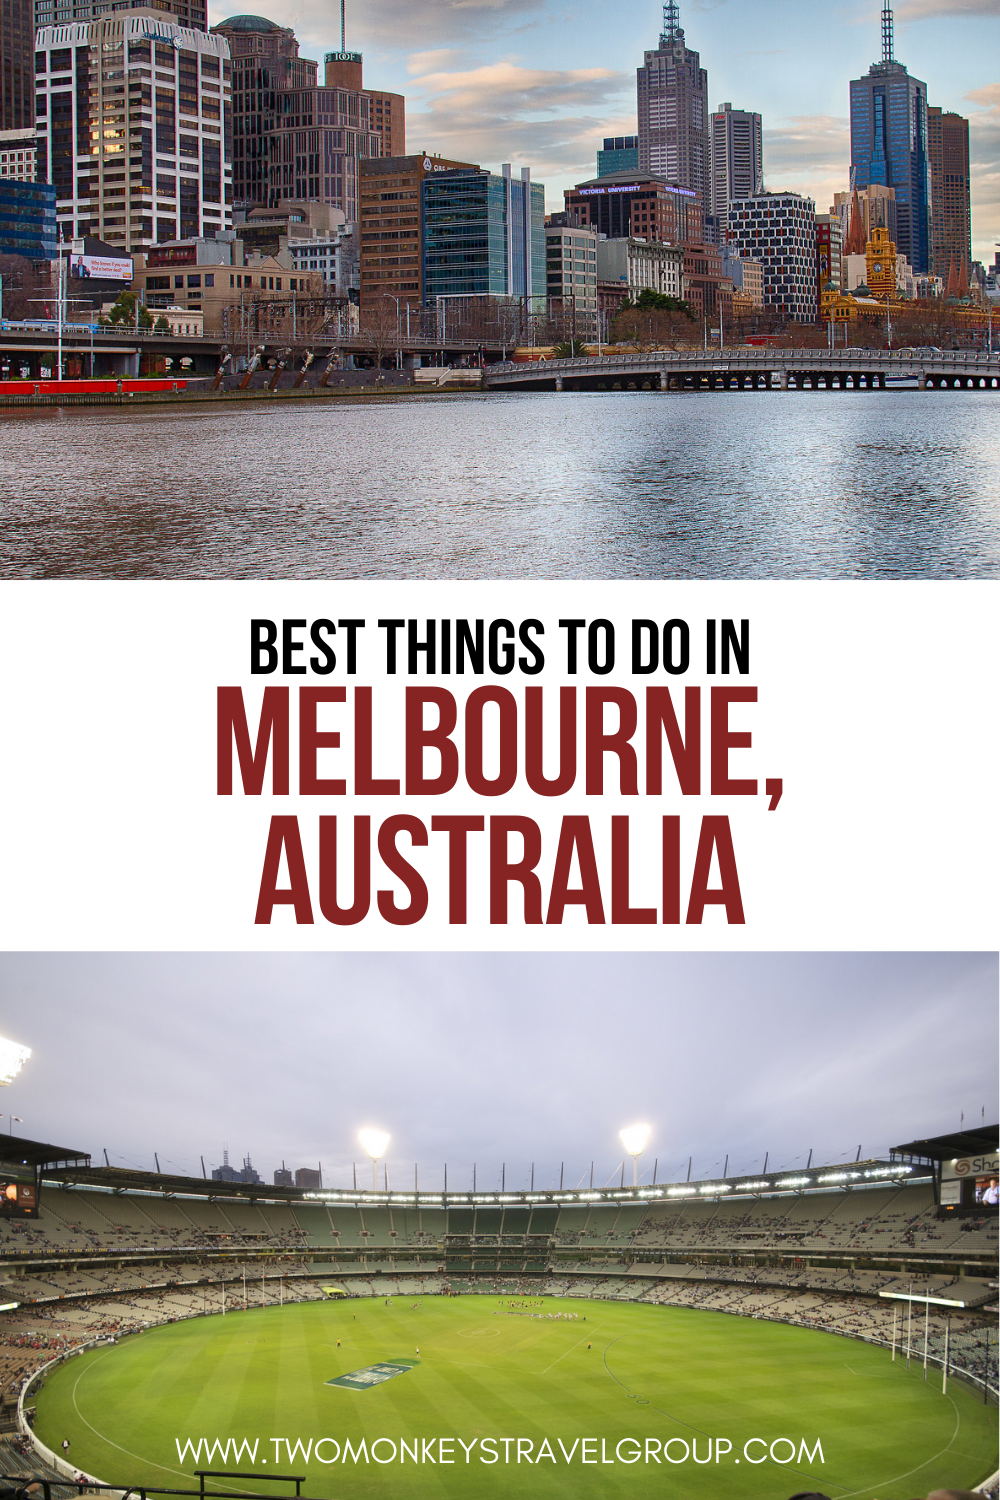 10 Things To Do in Melbourne, Australia [with Suggested Tours]